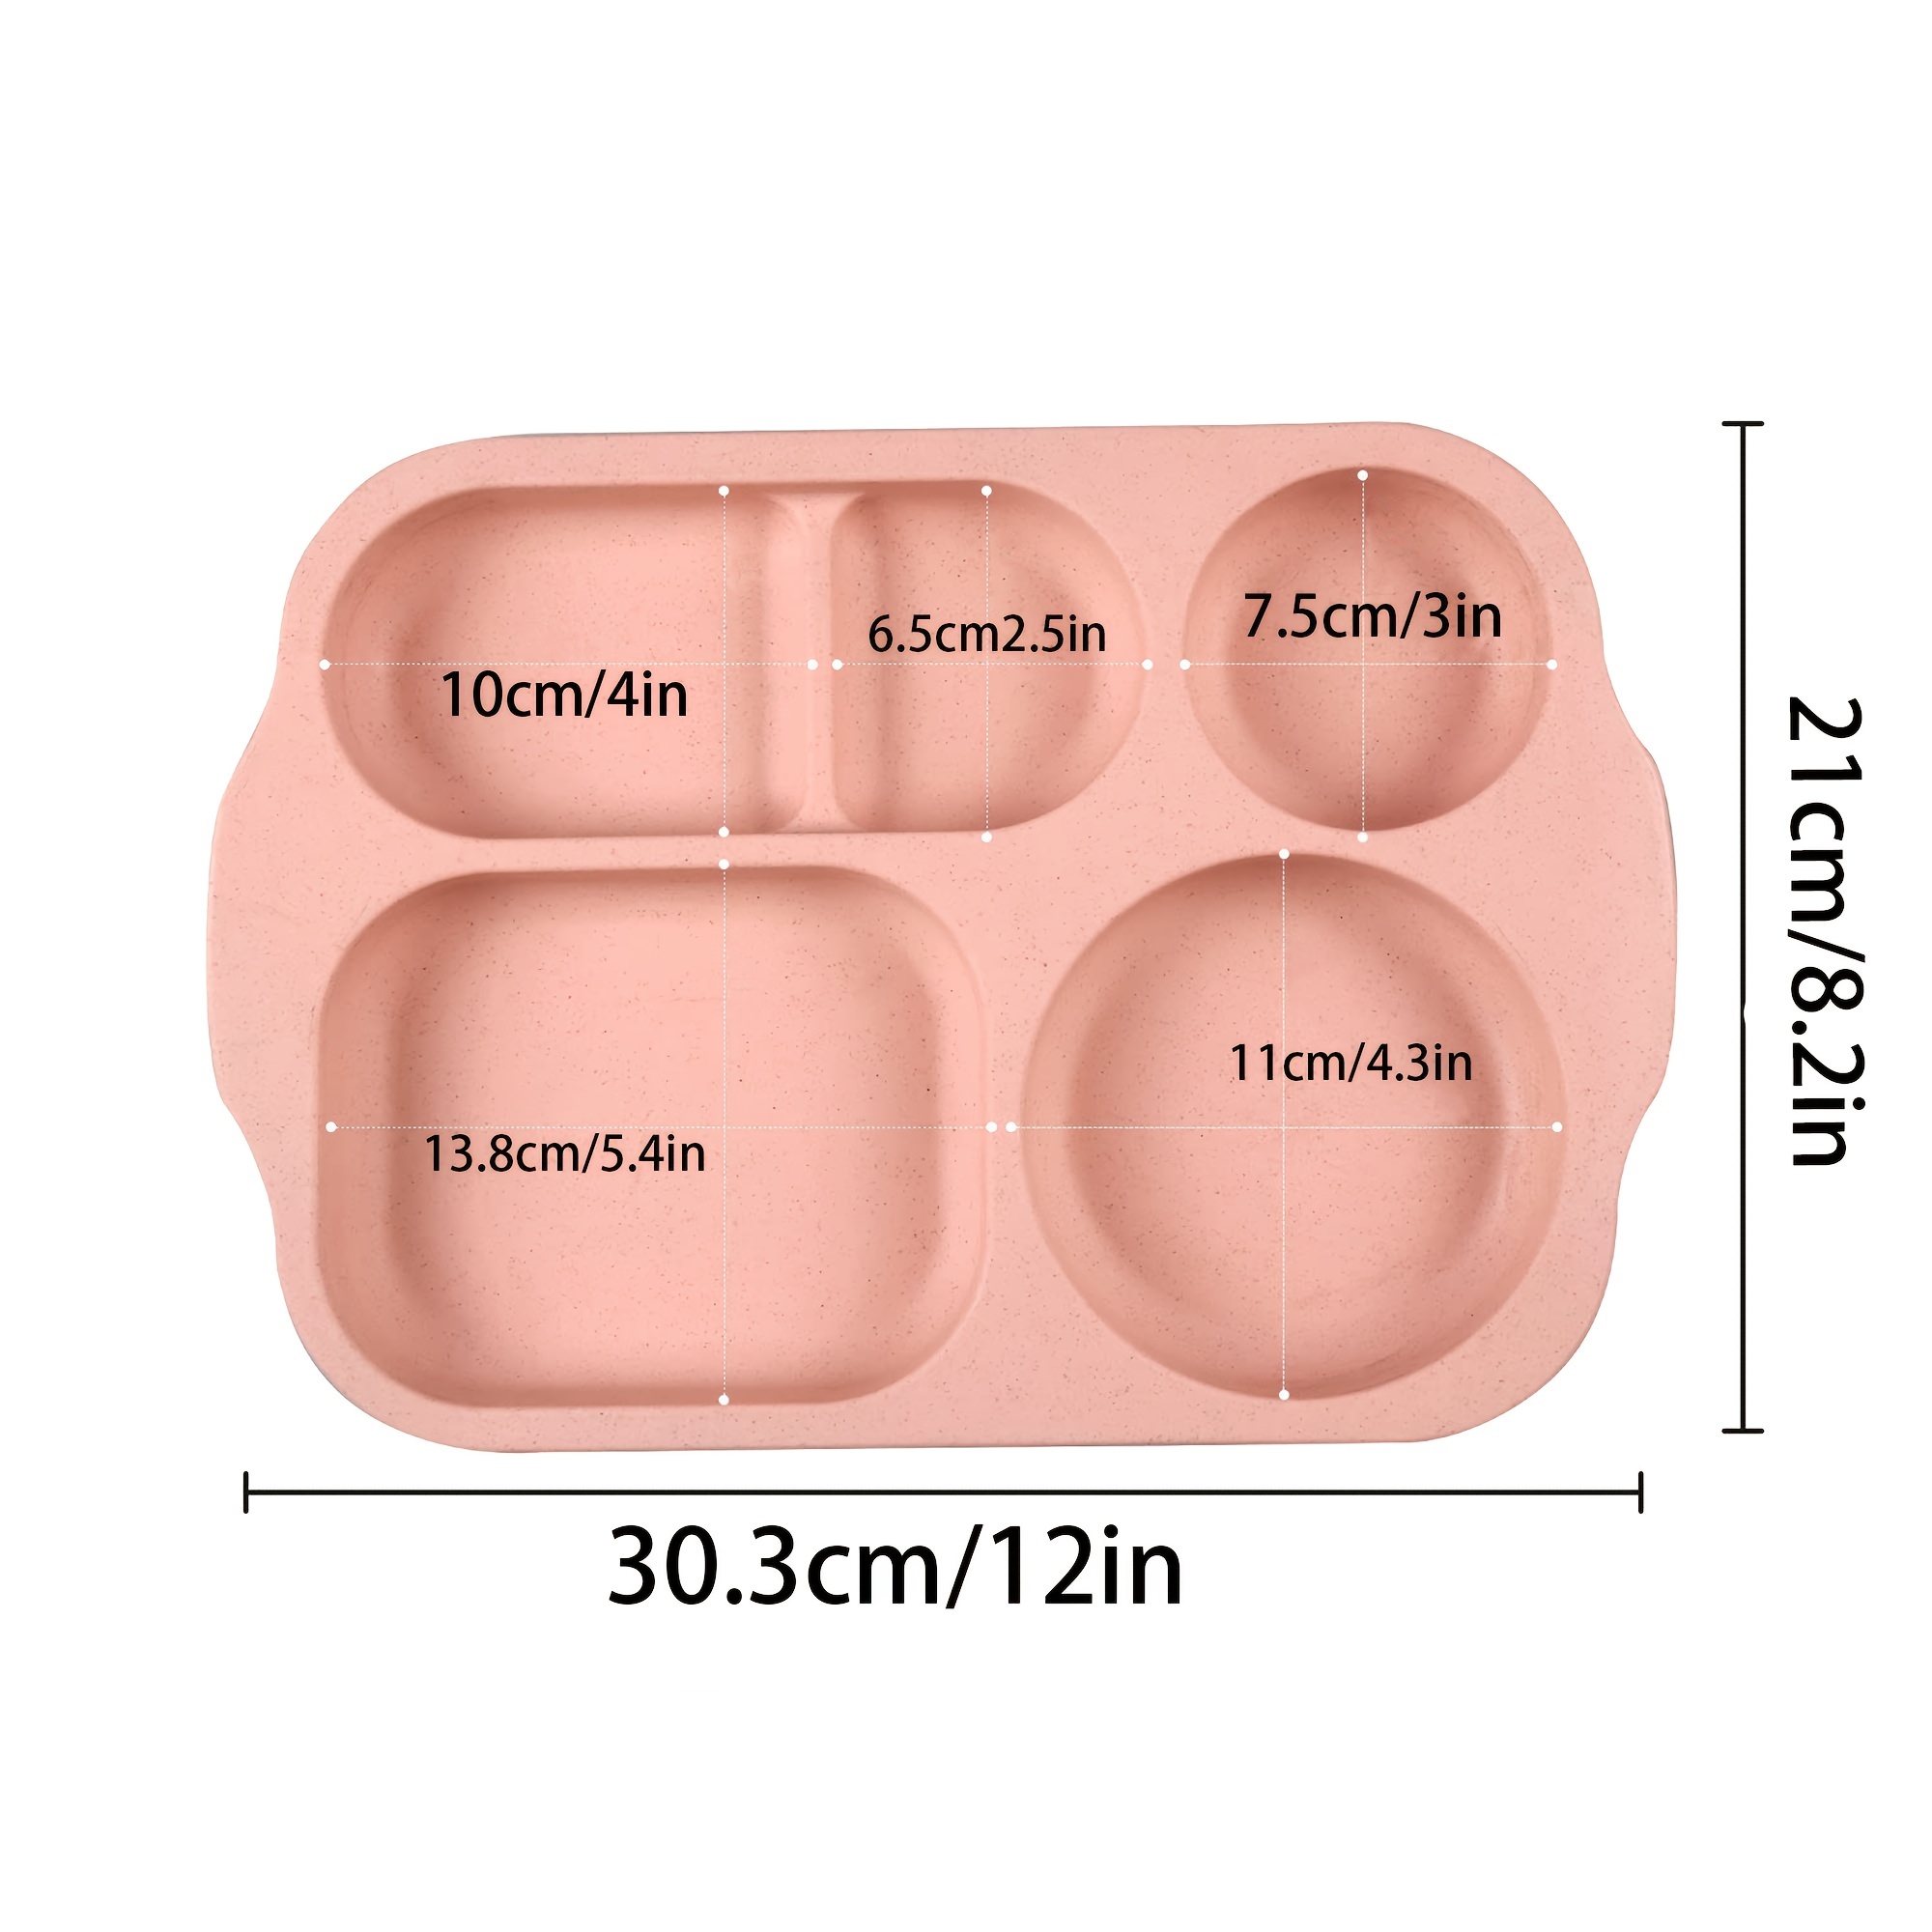 4 Pack Unbreakable Divided Plates, 6 Compartments Wheat Straw